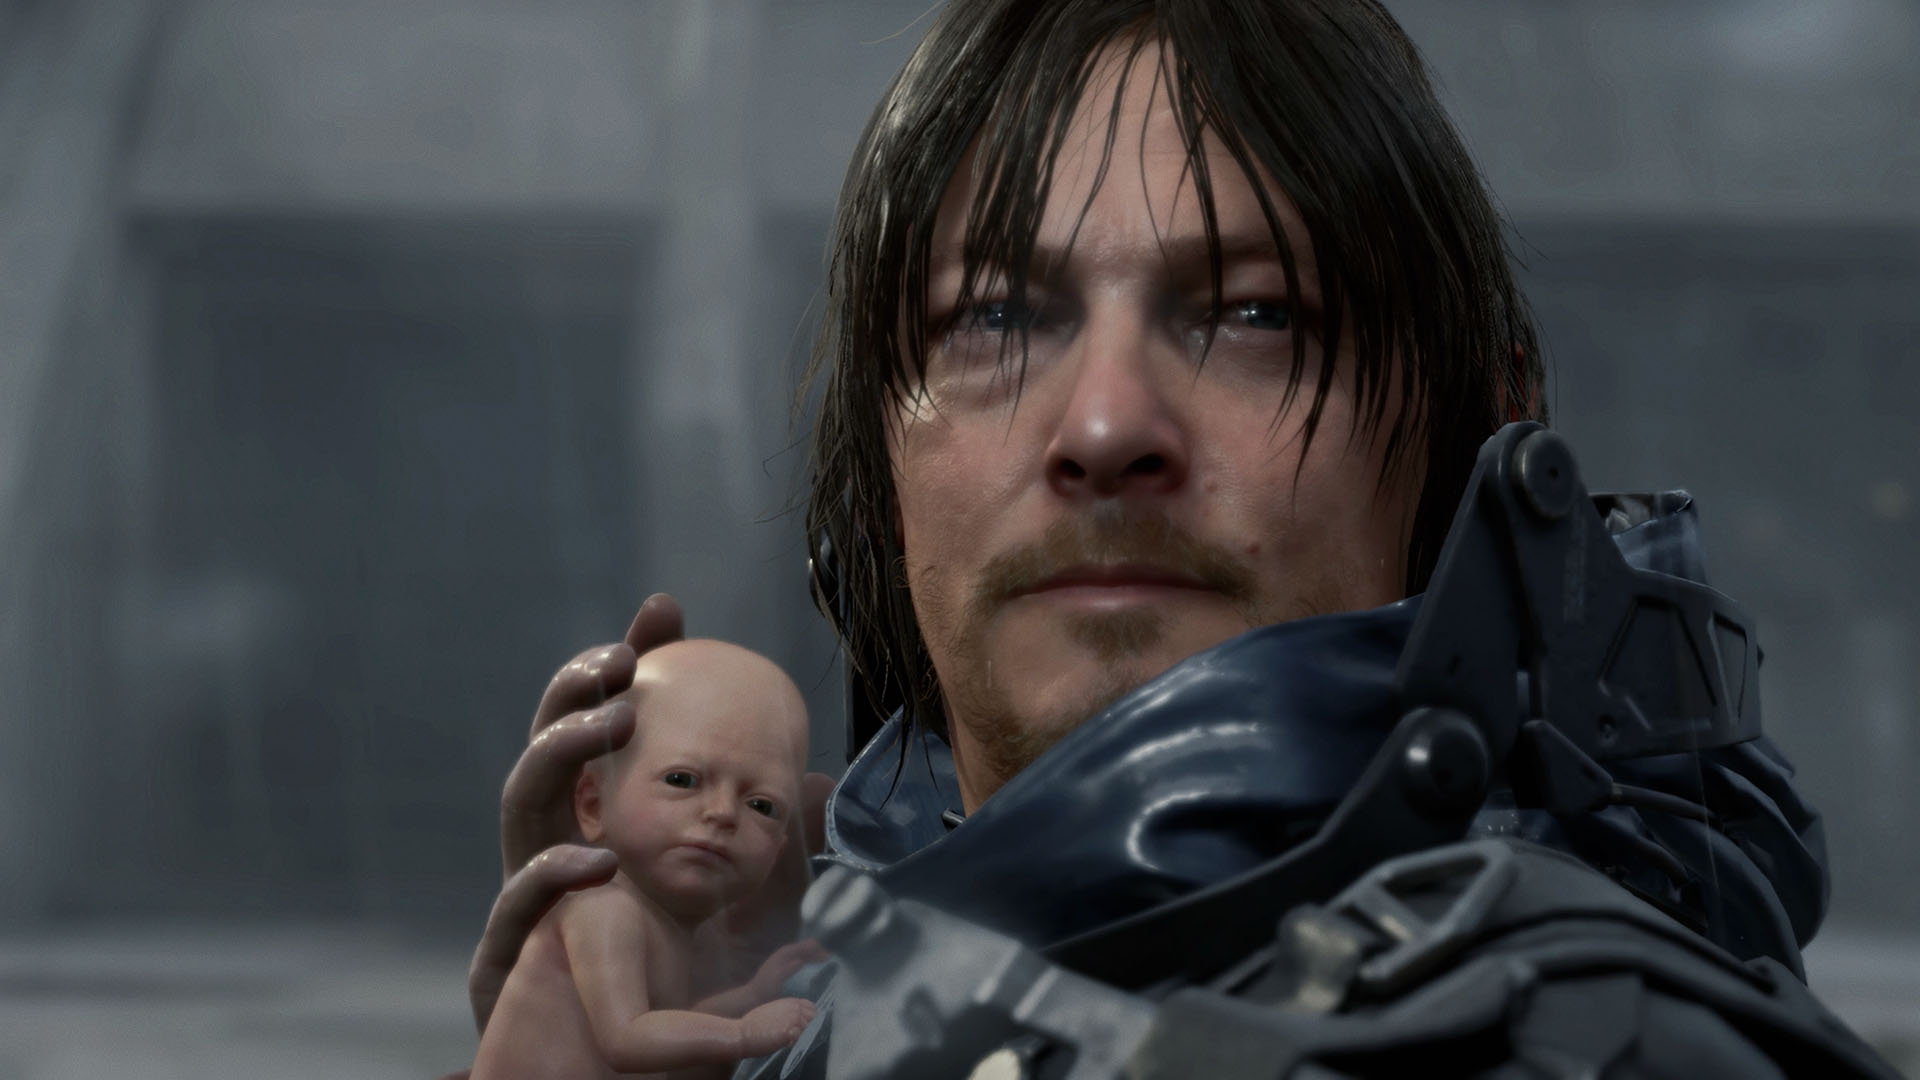 DEATH STRANDING COMES TO PS5